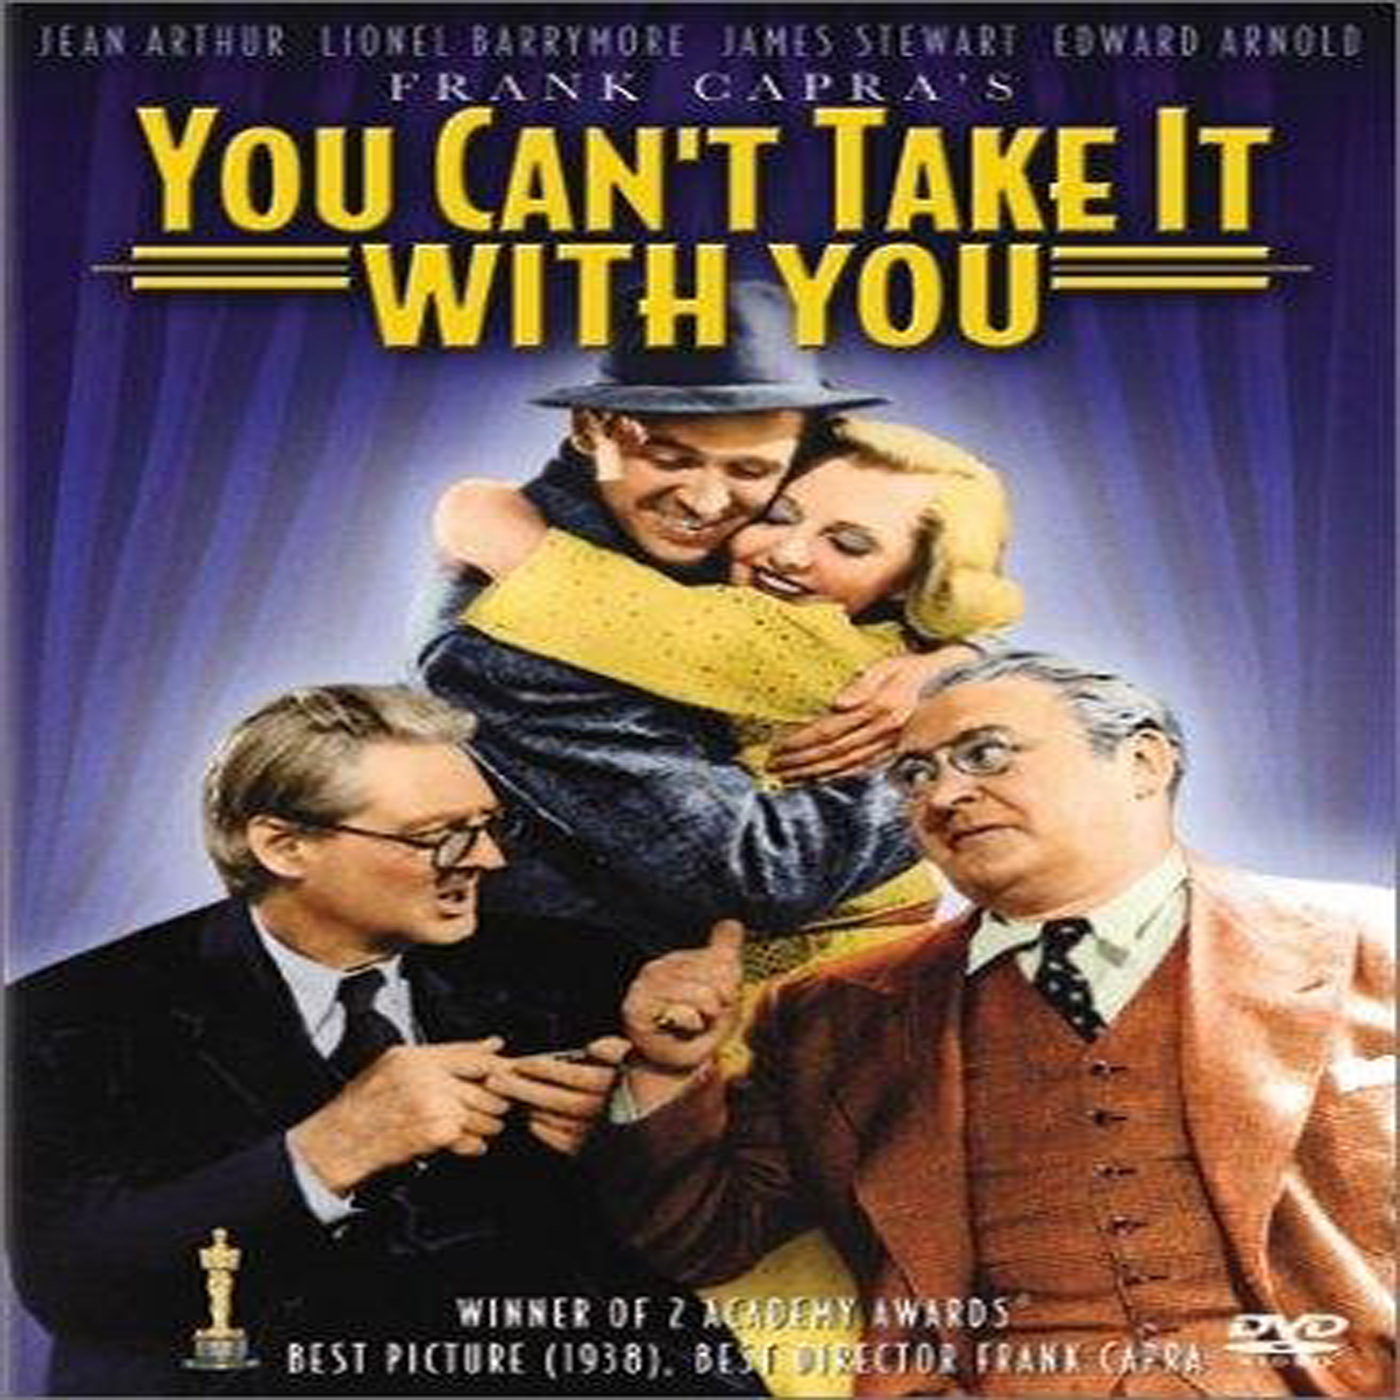 Movie Reviews! - ”You Can’t Take It With You”